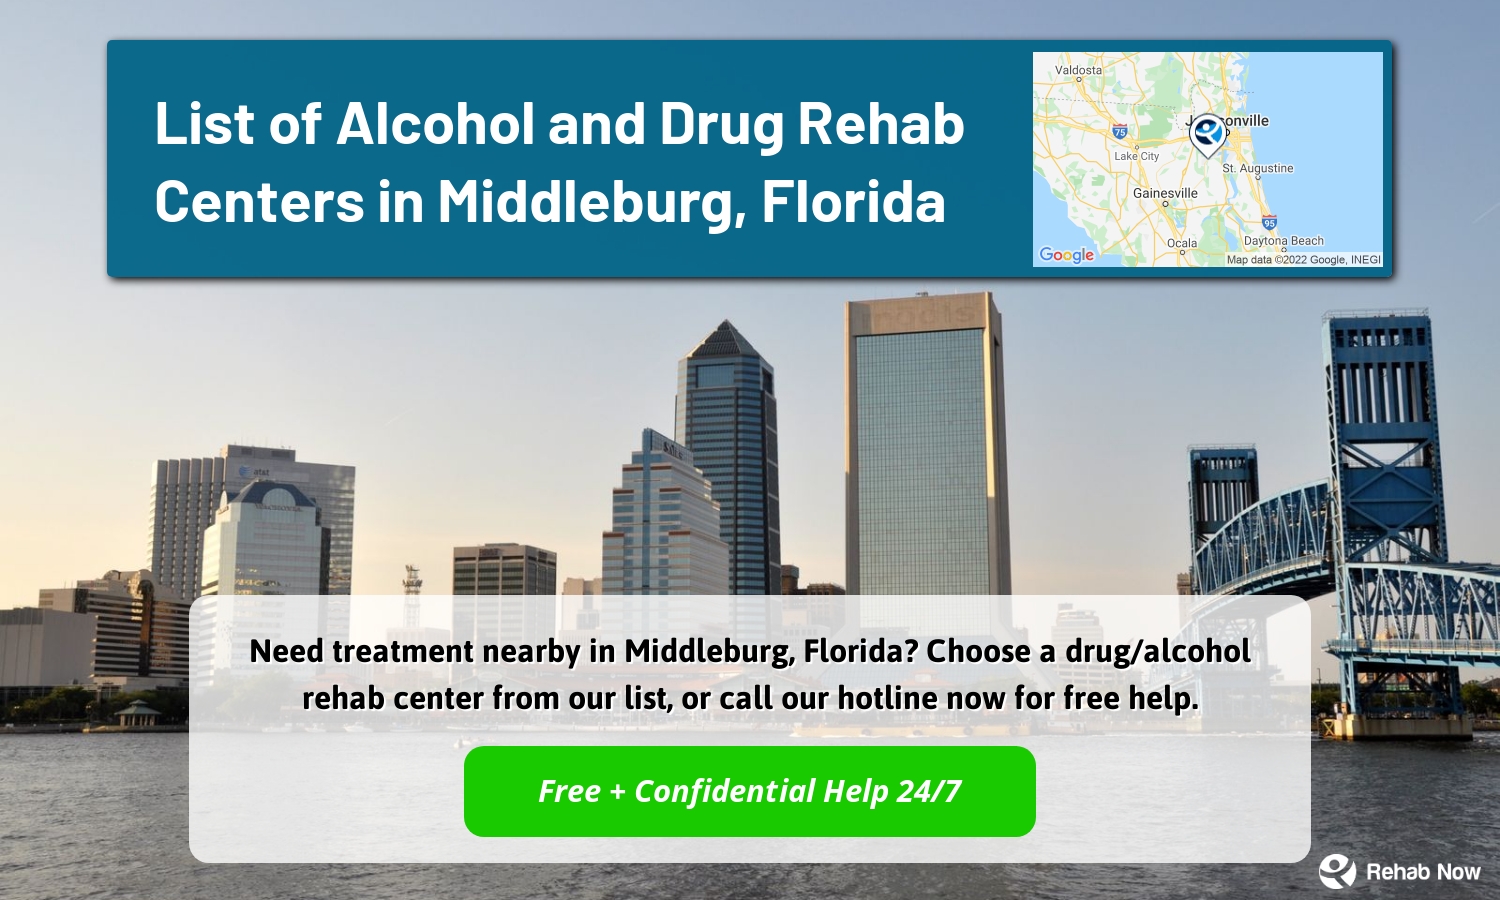 Need treatment nearby in Middleburg, Florida? Choose a drug/alcohol rehab center from our list, or call our hotline now for free help.